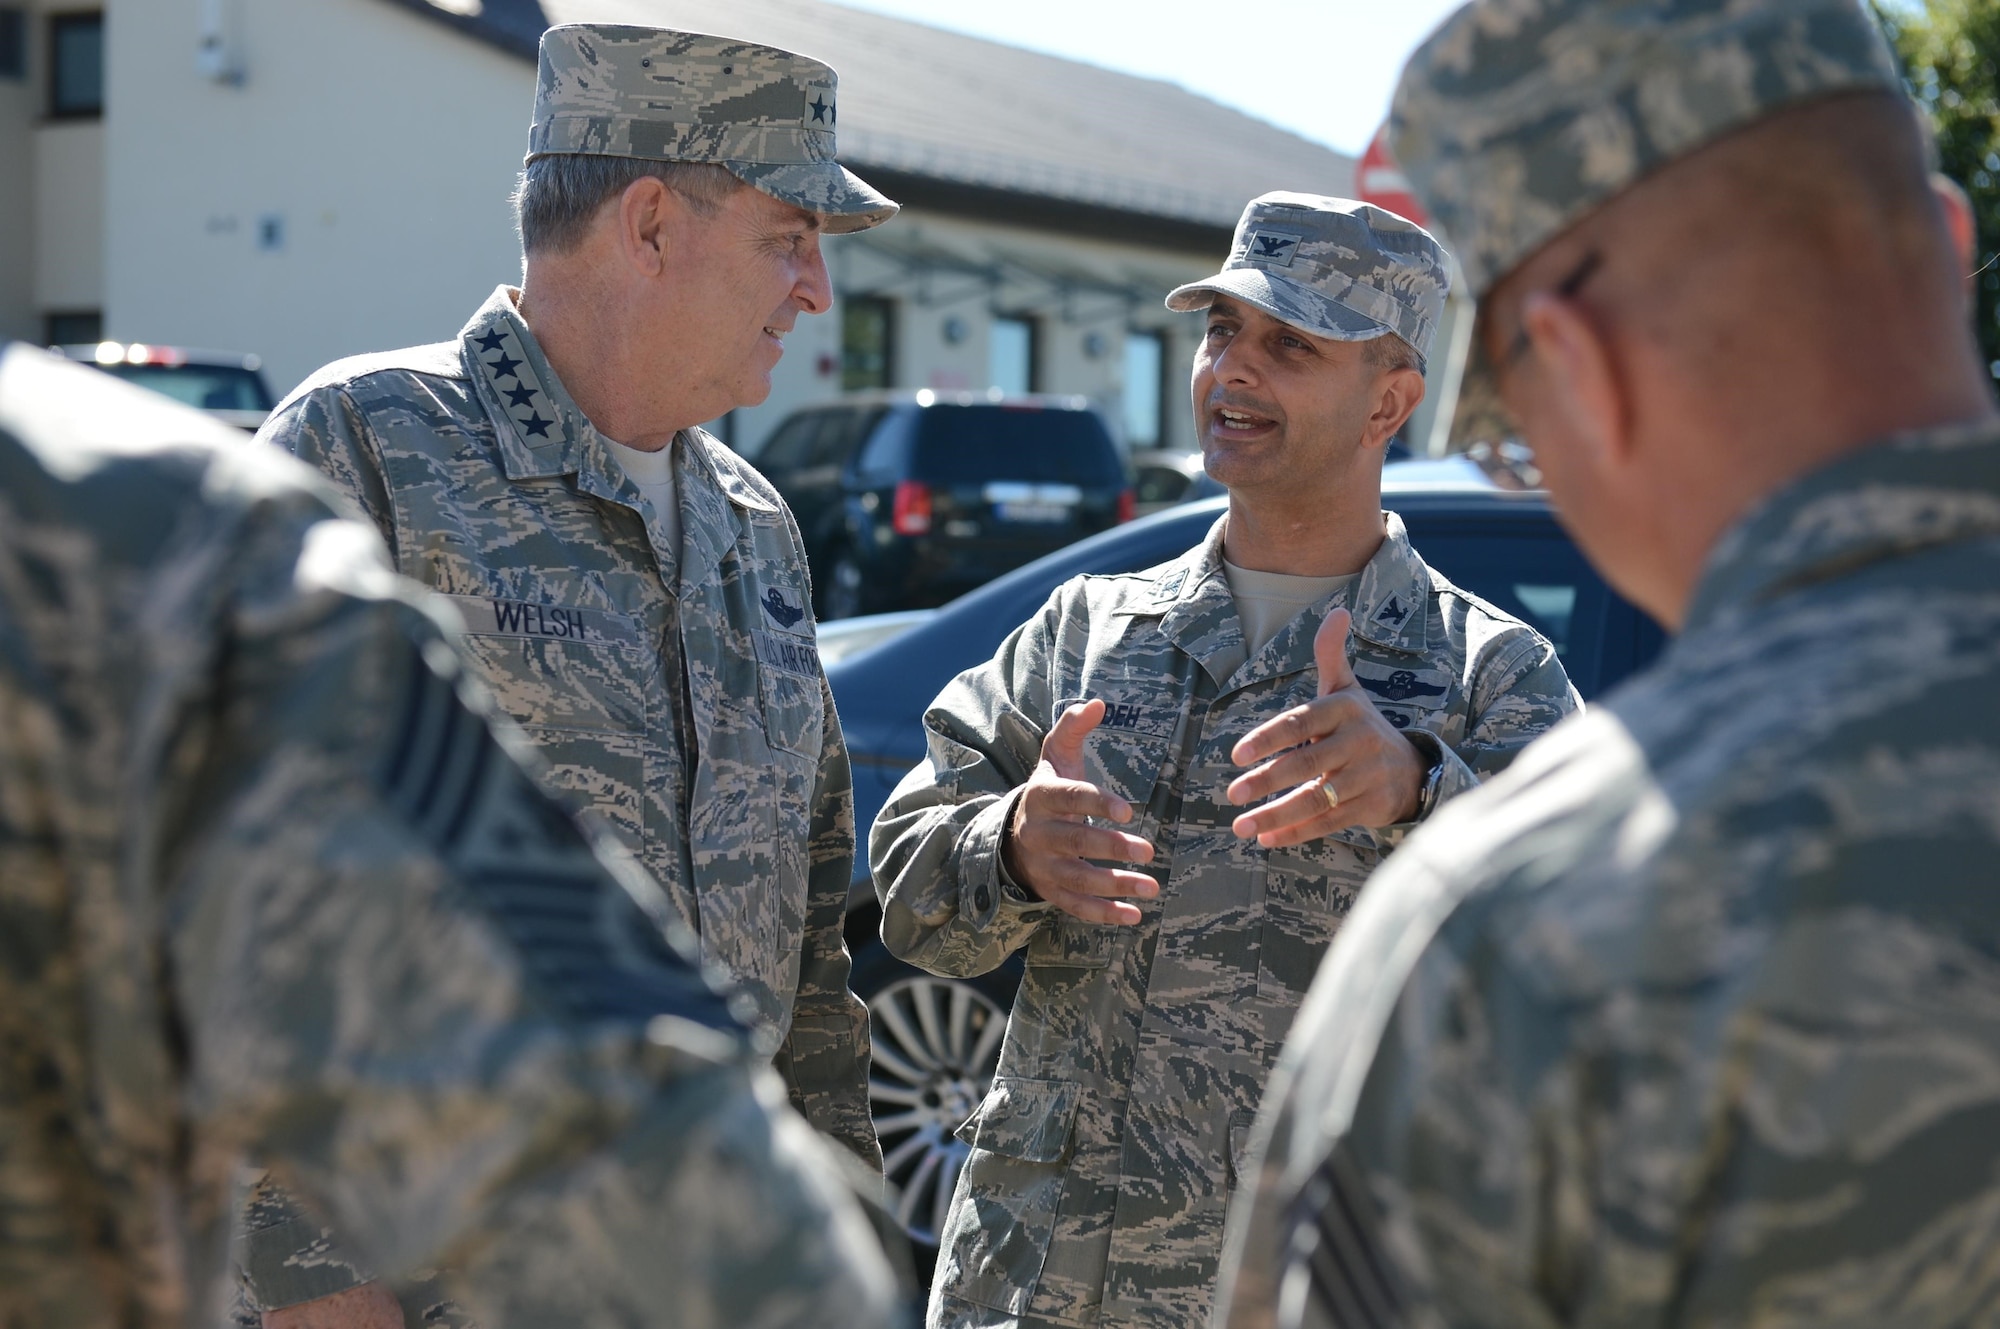 Col. David Julazadeh, 52nd Fighter Wing commander, welcomes Air Force Chief of Staff Gen. Mark A. Welsh III to Spangdahlem Air Base Aug. 1. This is the first time Welsh, Chief Master Sgt. of the Air Force James Cody and their spouses, Betty Welsh and Atheena Cody, visited the base together. During the visit, Welsh and Cody met with Airmen for lunch before hosting an Airman's call to thank Airmen and their families for their service and dedication, as well as address current challenges facing the Air Force. 